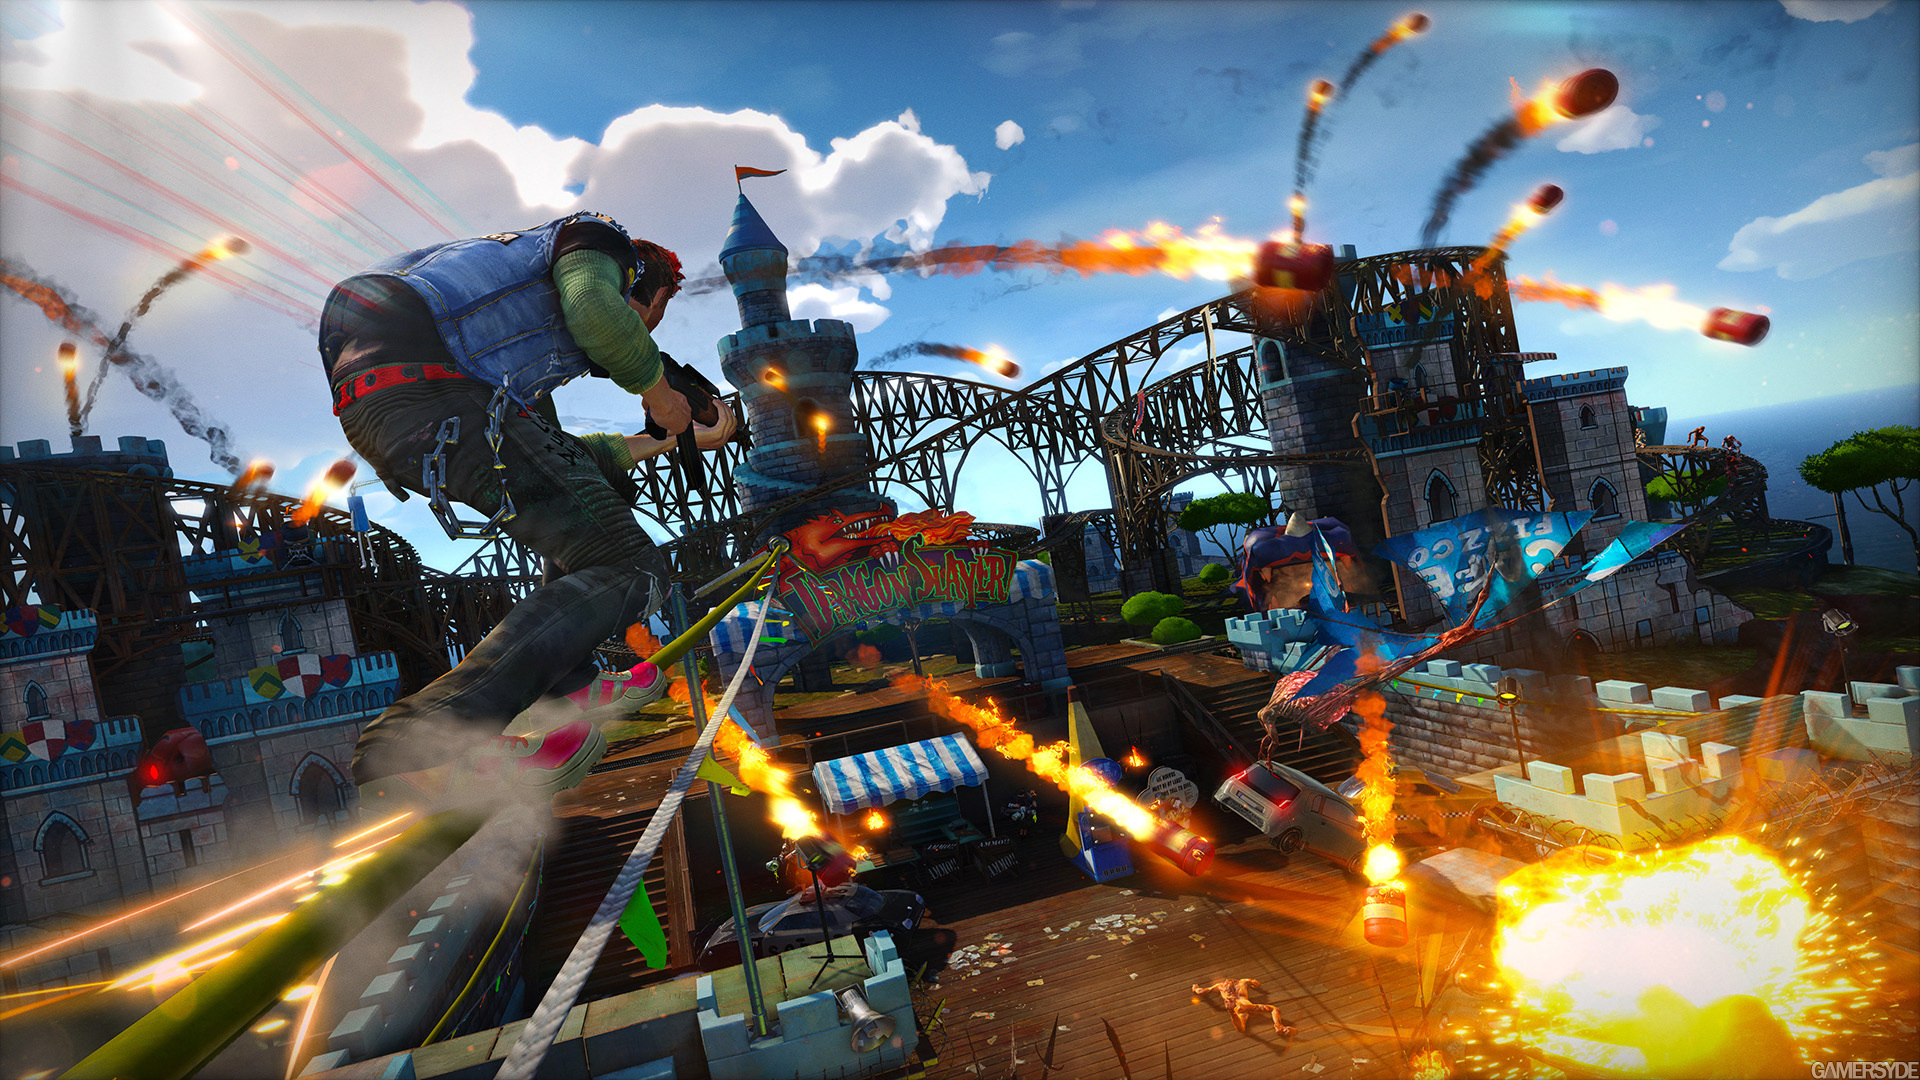 Sunset Overdrive - Cinematic Trailer 